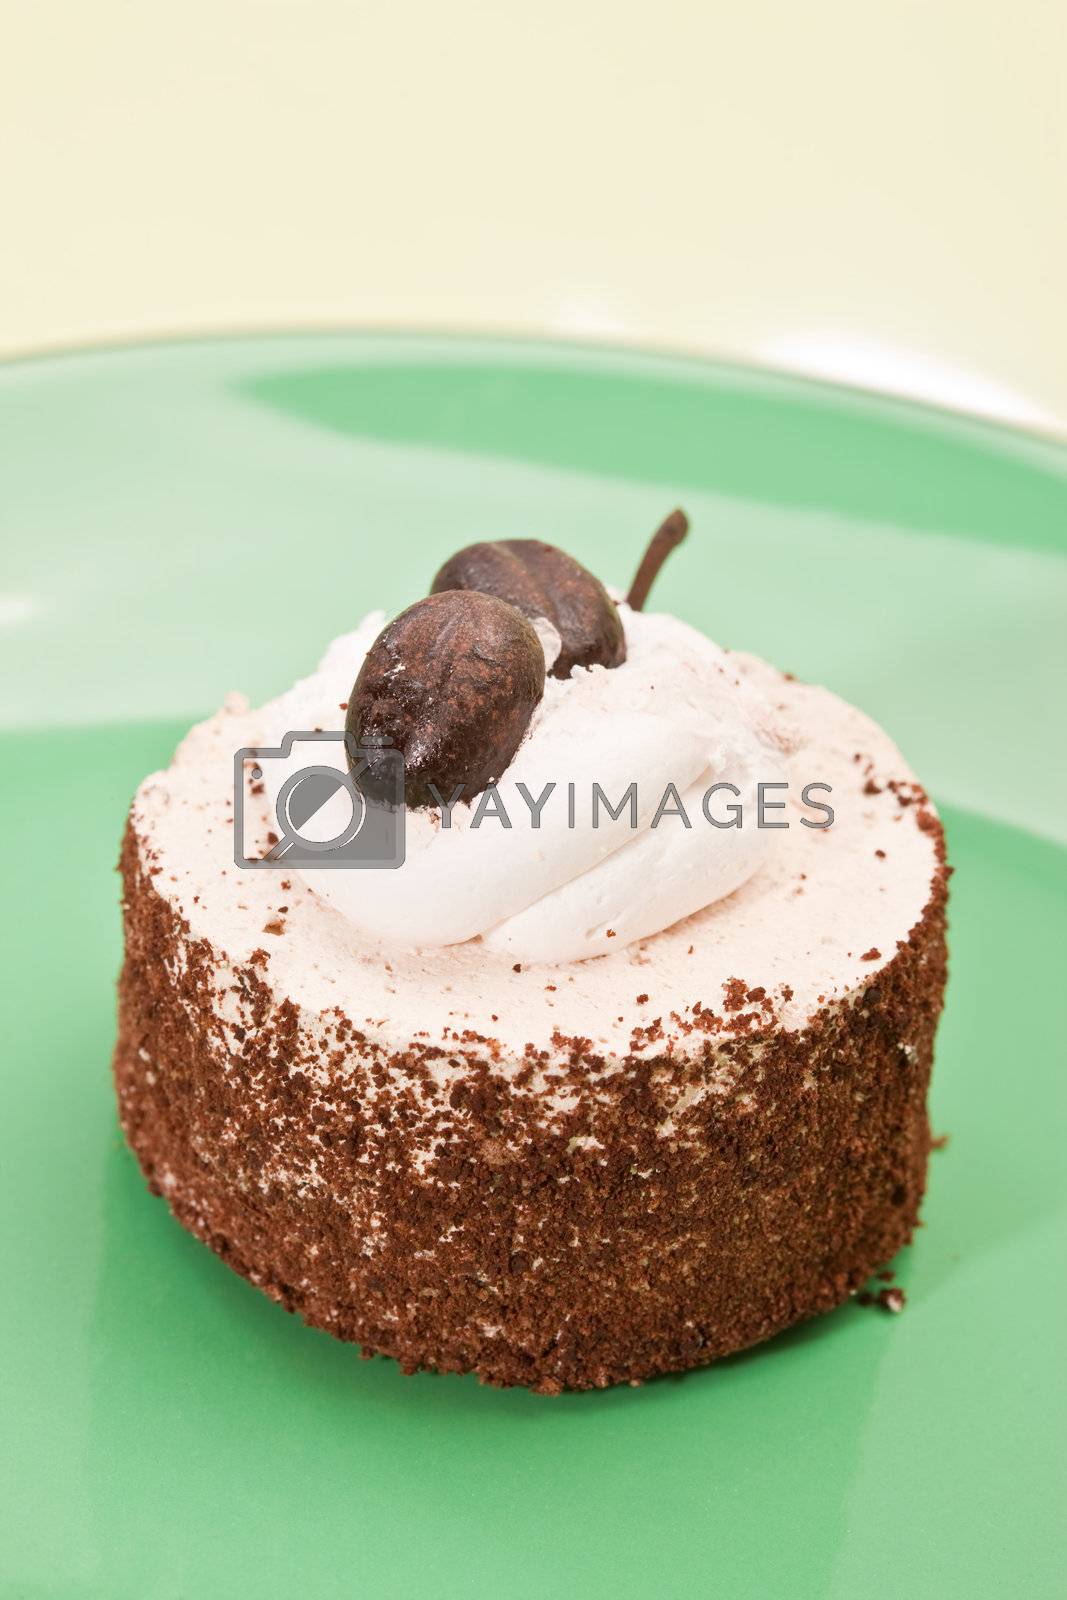 Royalty free image of cake by agg